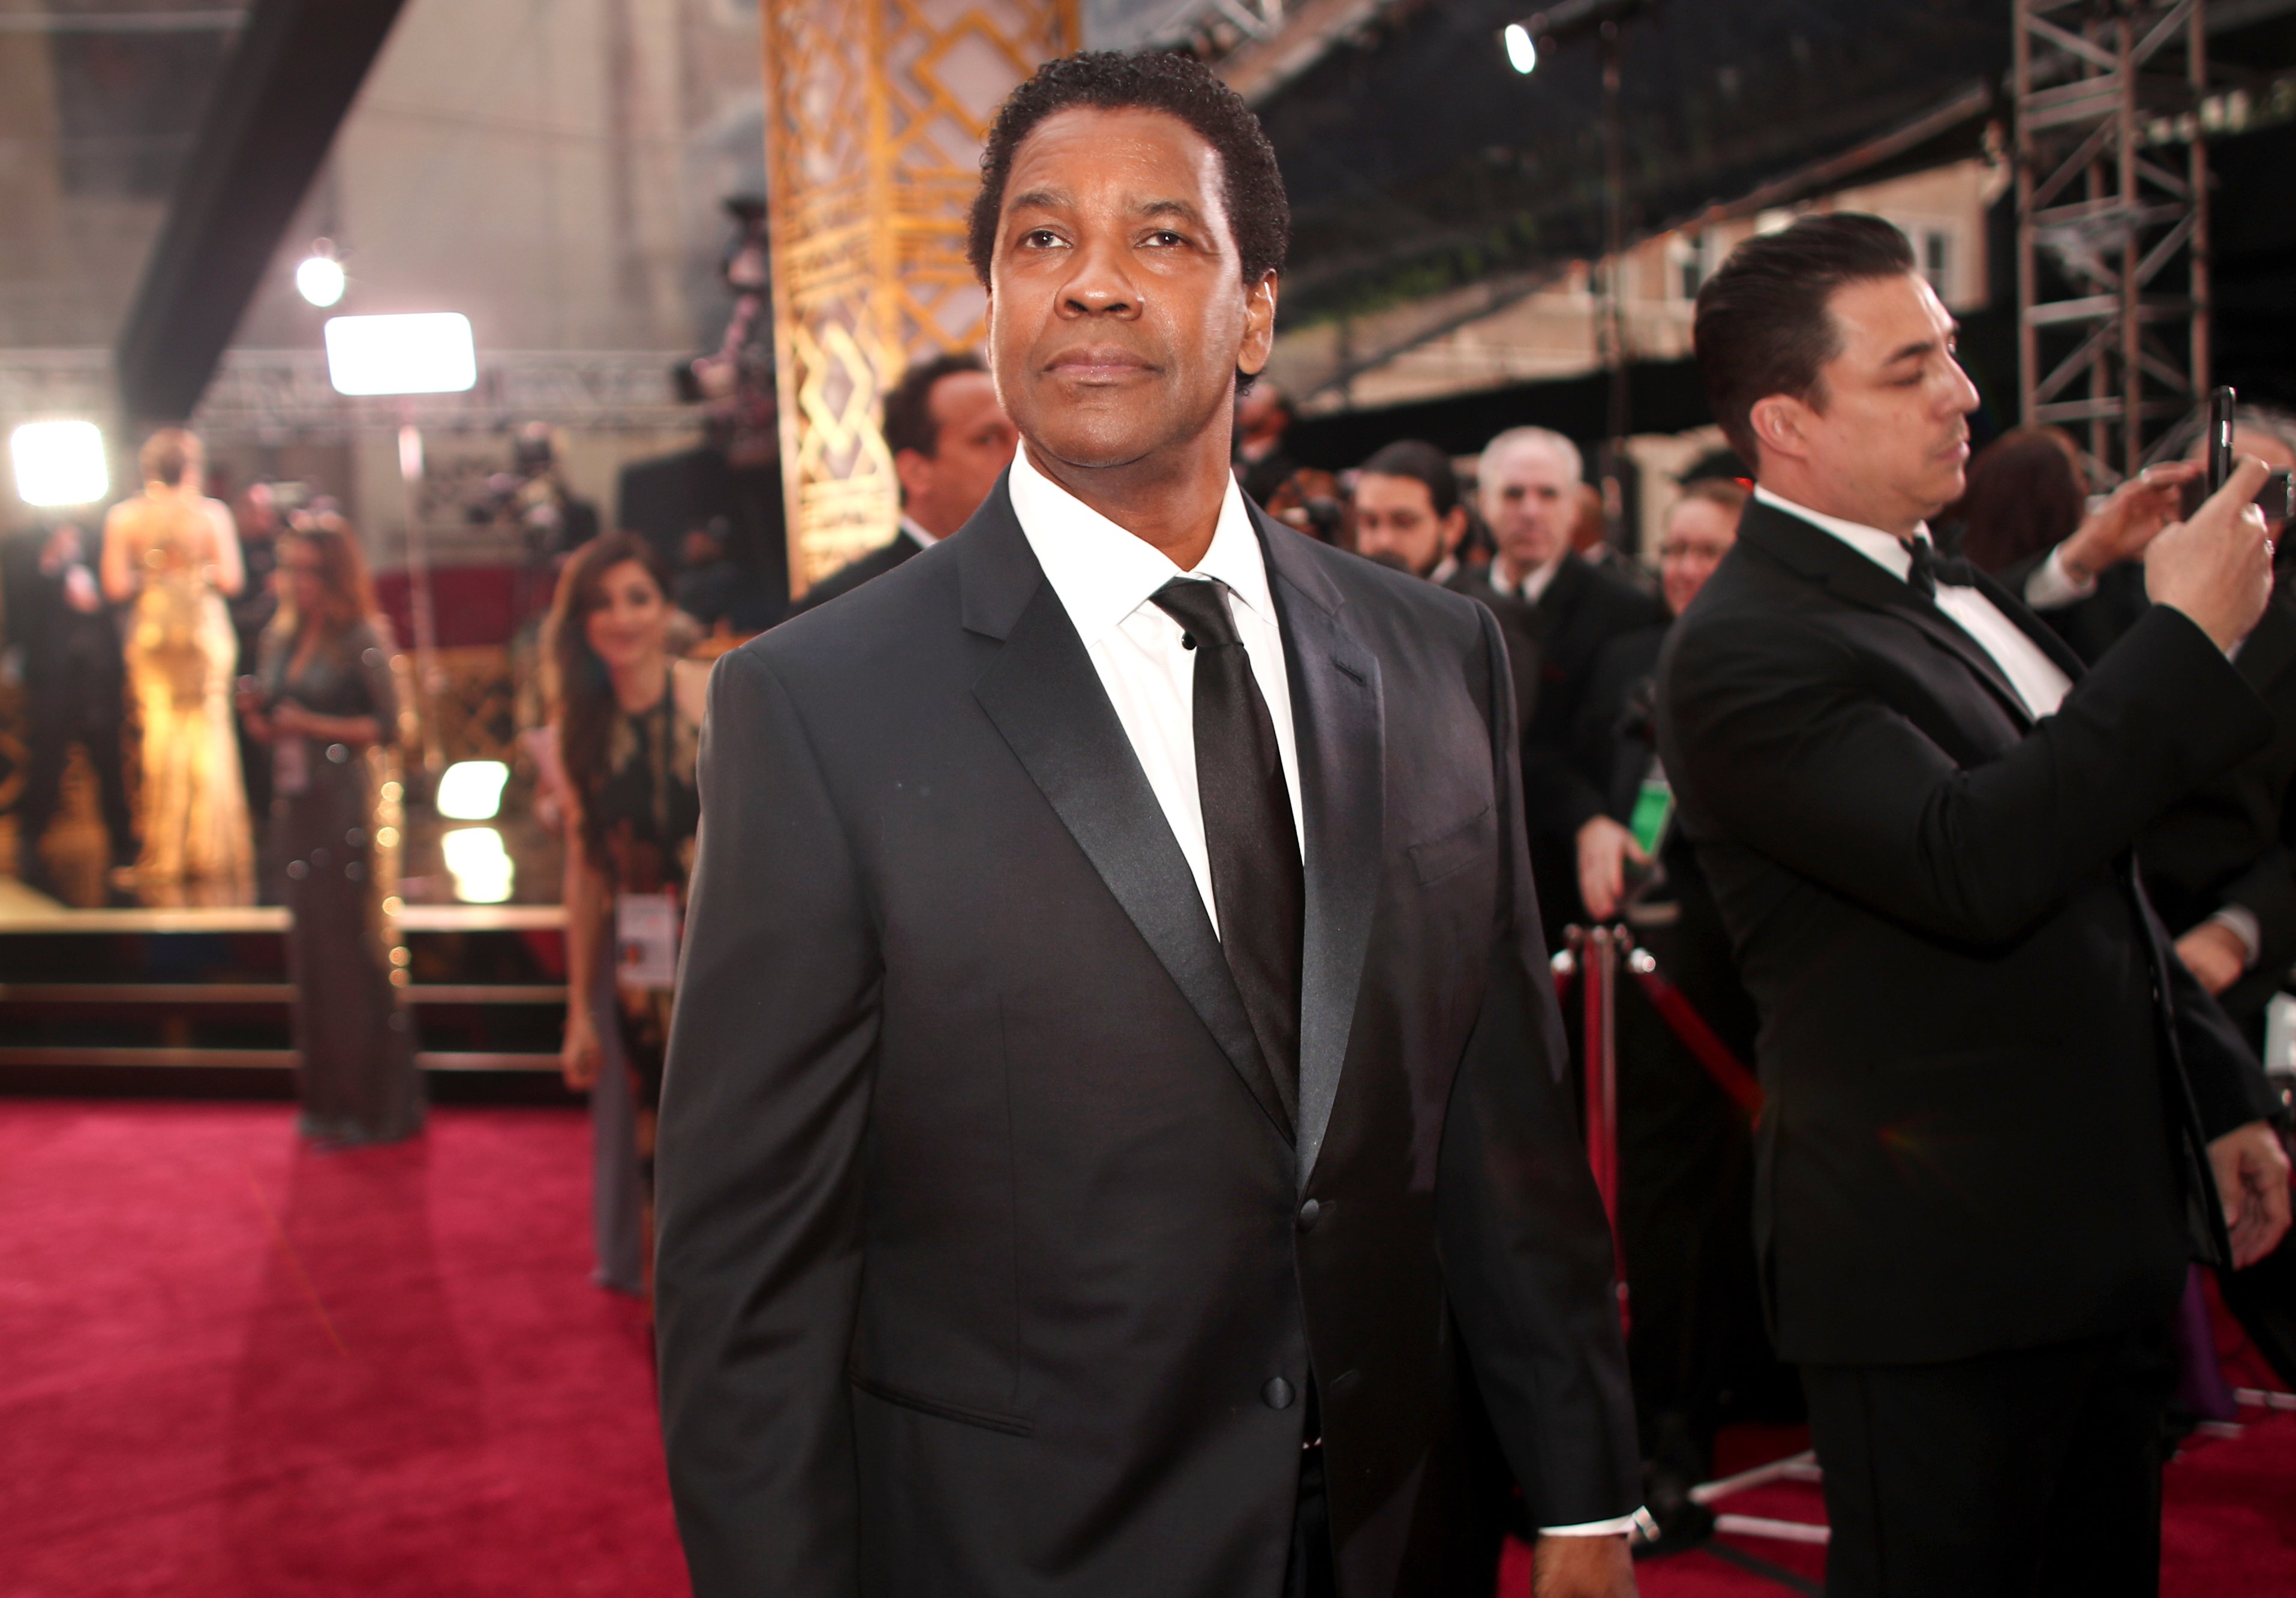 Actor Denzel Washington attends the 89th Annual Academy Awards at Hollywood & Highland Center on February 26, 2017 in Hollywood, California. | Source: Getty Images